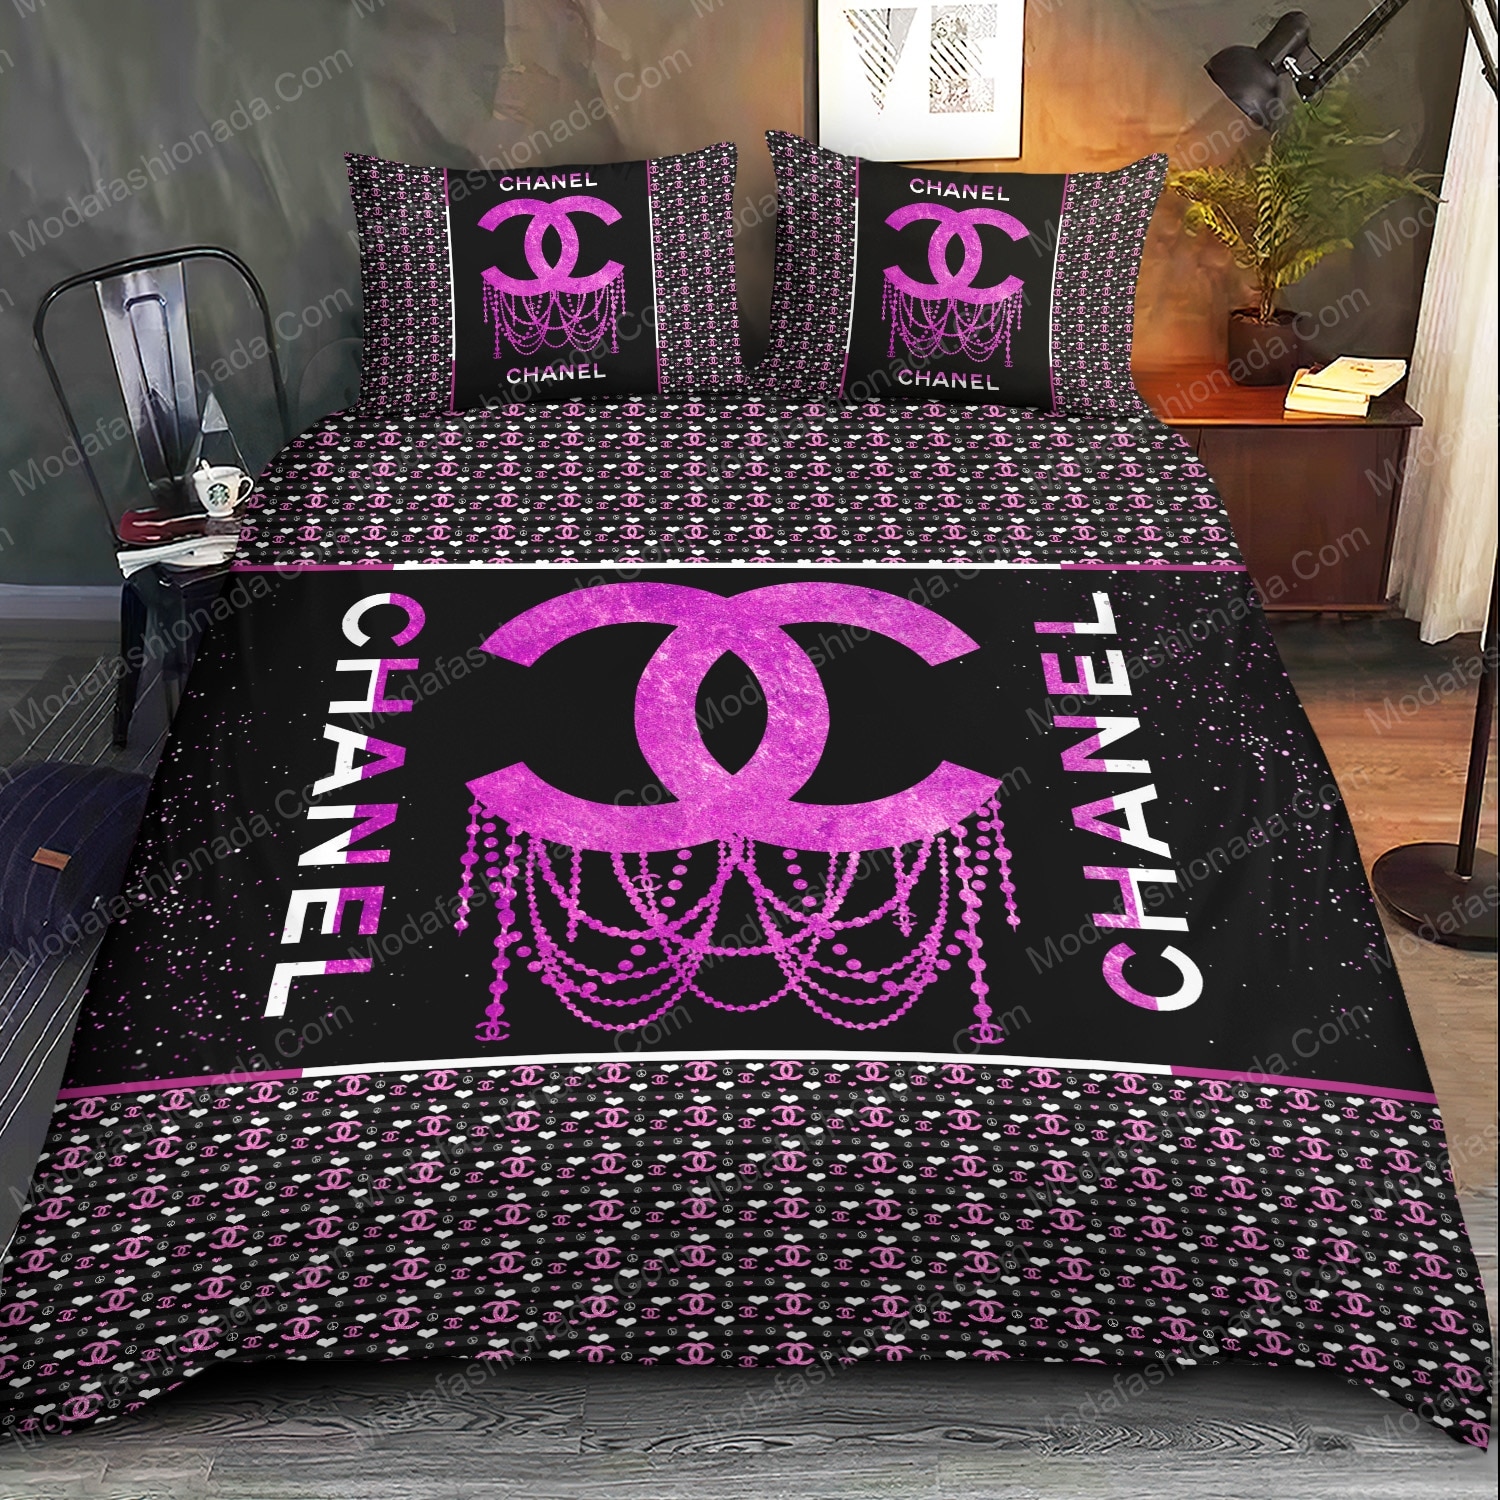 Buy Coco Chanel Bedding Sets Bed Sets